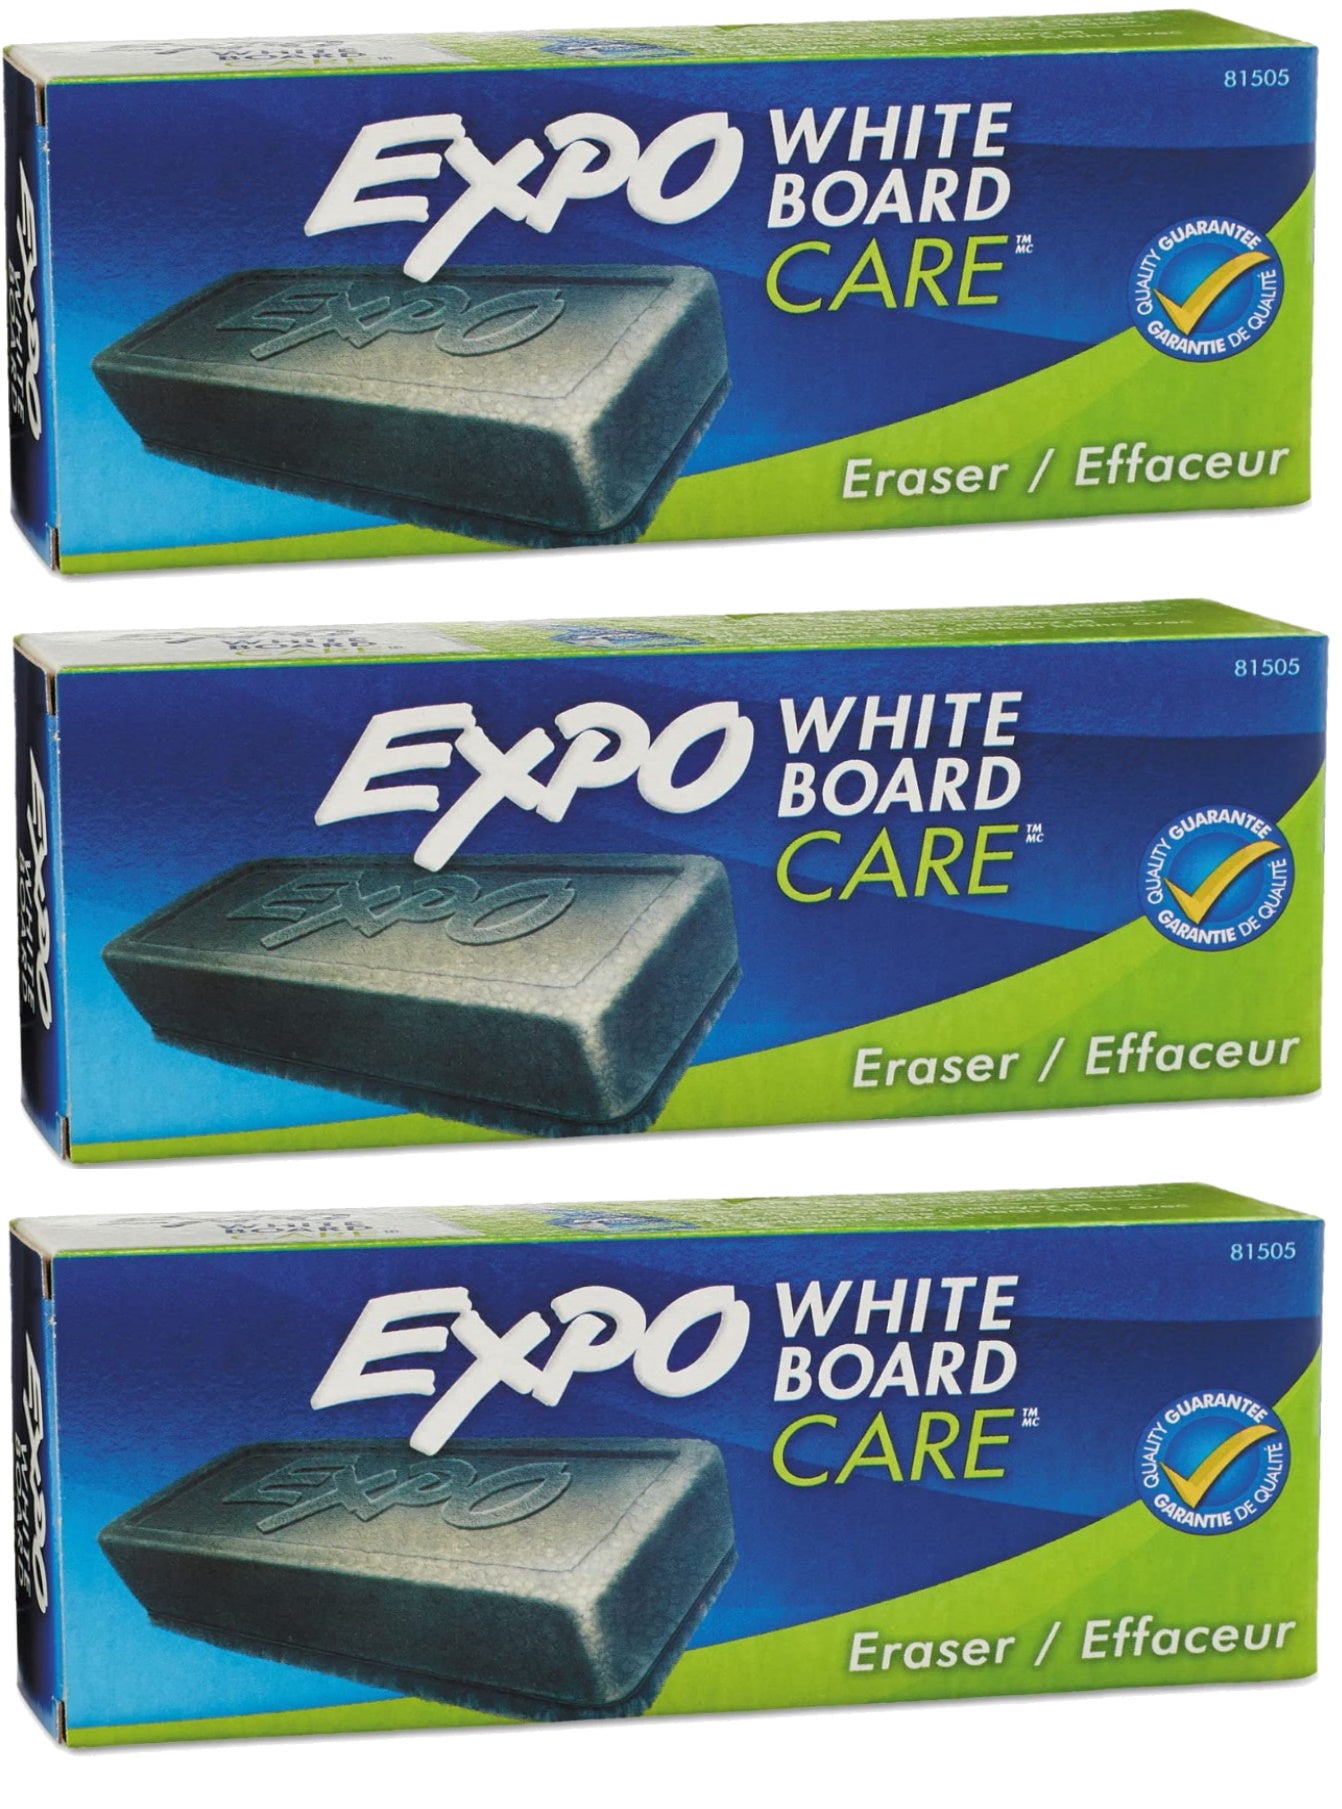 3 pcs Expo Dry Mark Eraser Block Whiteboard Board Eraser, Soft Pile 5 1/8 W x 1 1/4 H inches